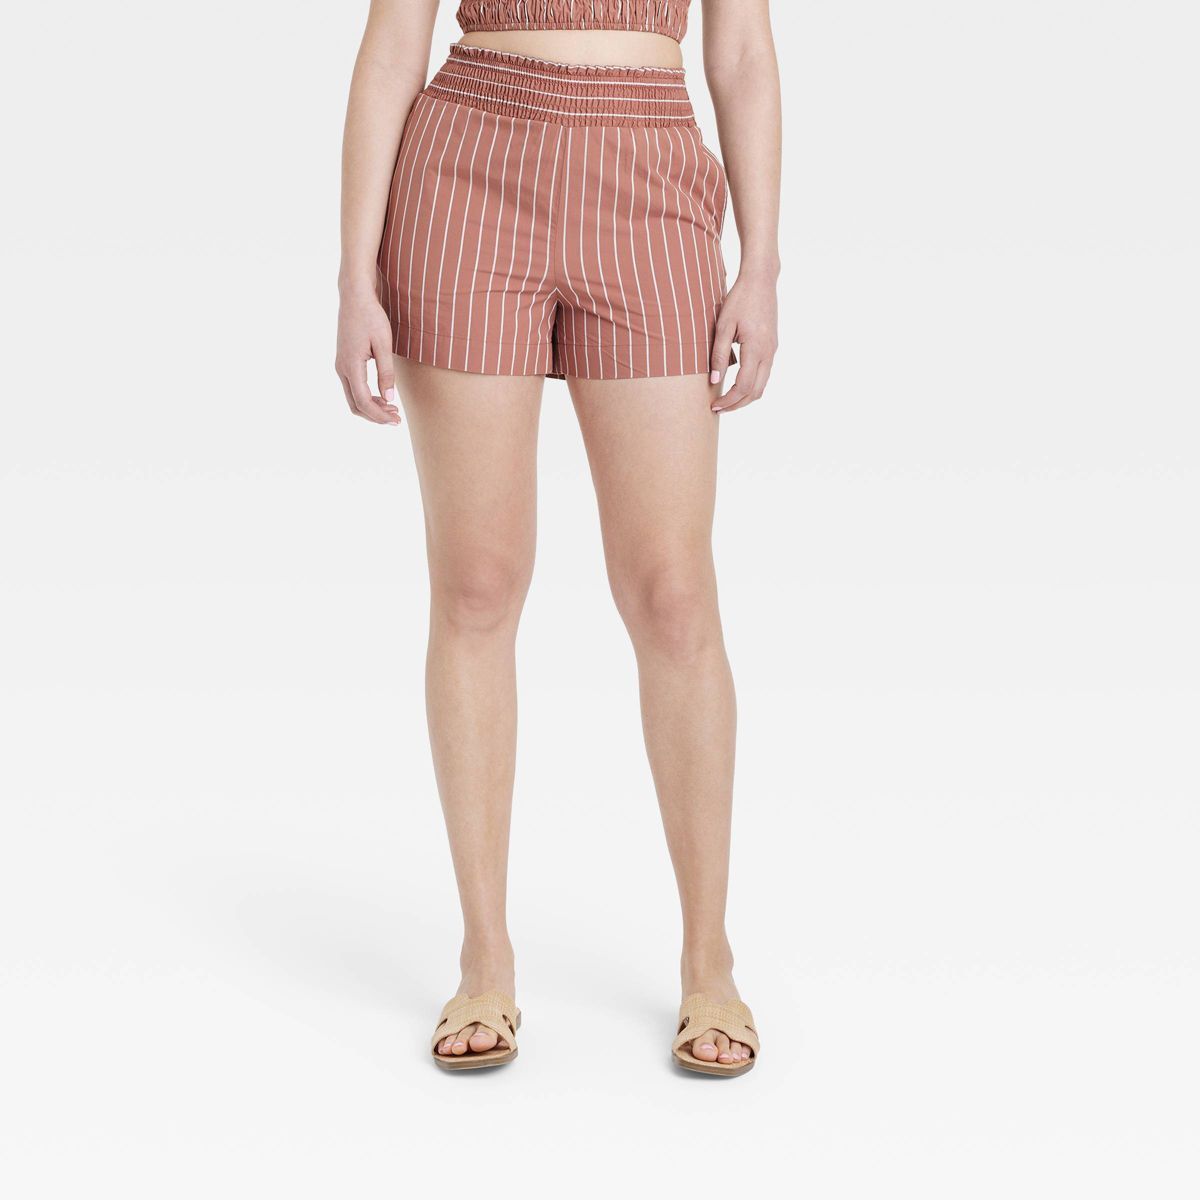 Women's High-Rise Pull-On Shorts - A New Day™ Brown Striped XS | Target